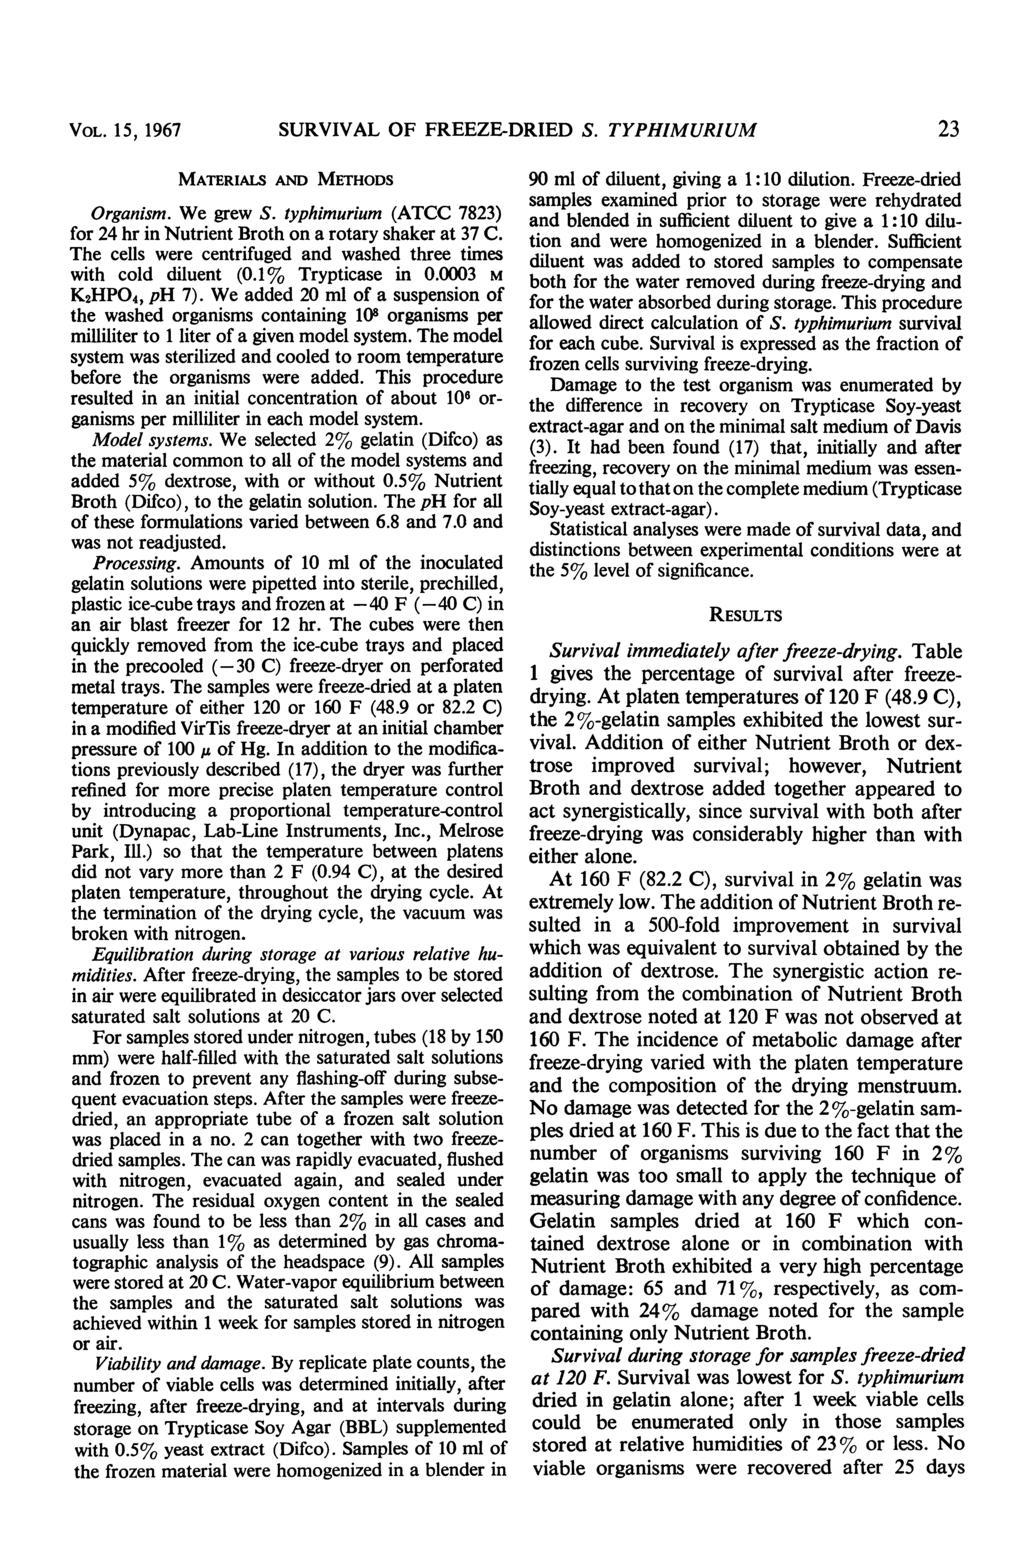 VOL. 1 5,1967 SURVIVAL OF FREEZE-DRIED S. TYPHIMURIUM 23 MATERLMLS AND METHODS Organism. We grew S. typhimurium (ATCC 7823) for 24 hr in Nutrient Broth on a rotary shaker at 37 C.